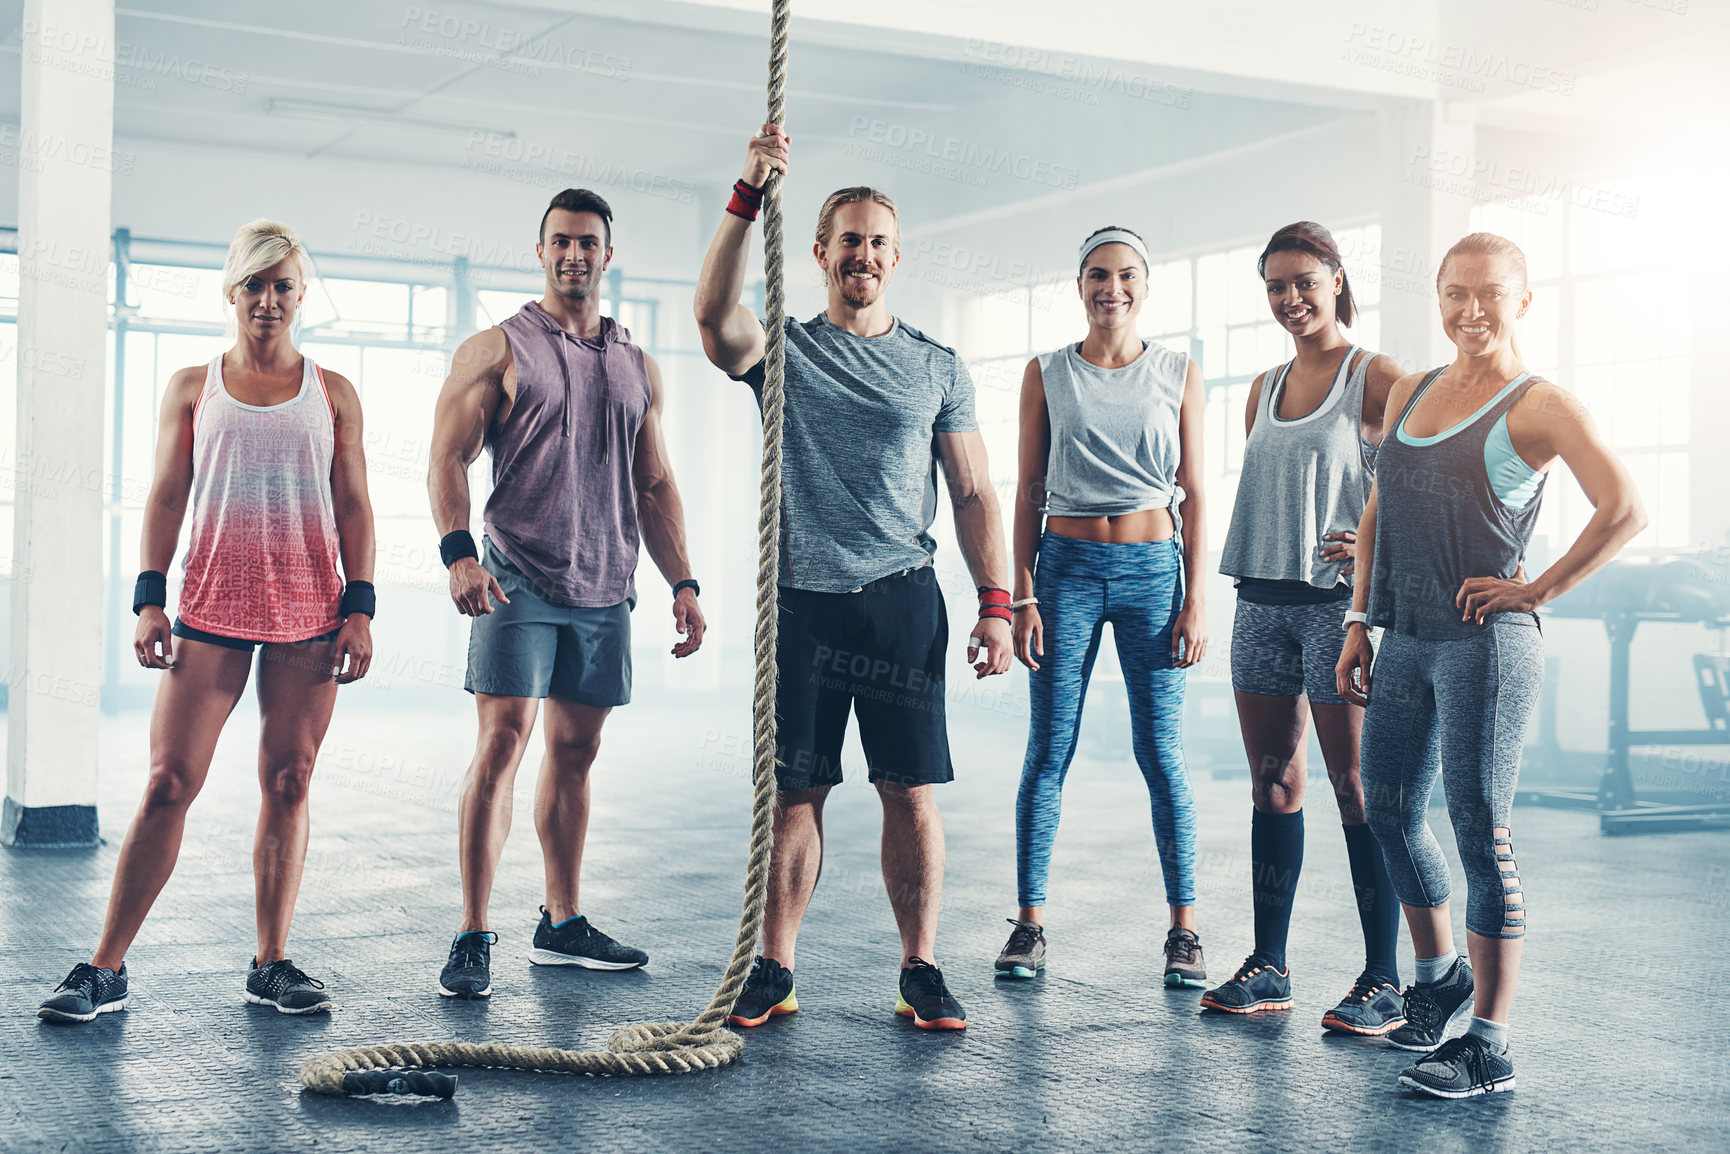 Buy stock photo Portrait of a fitness group standing together